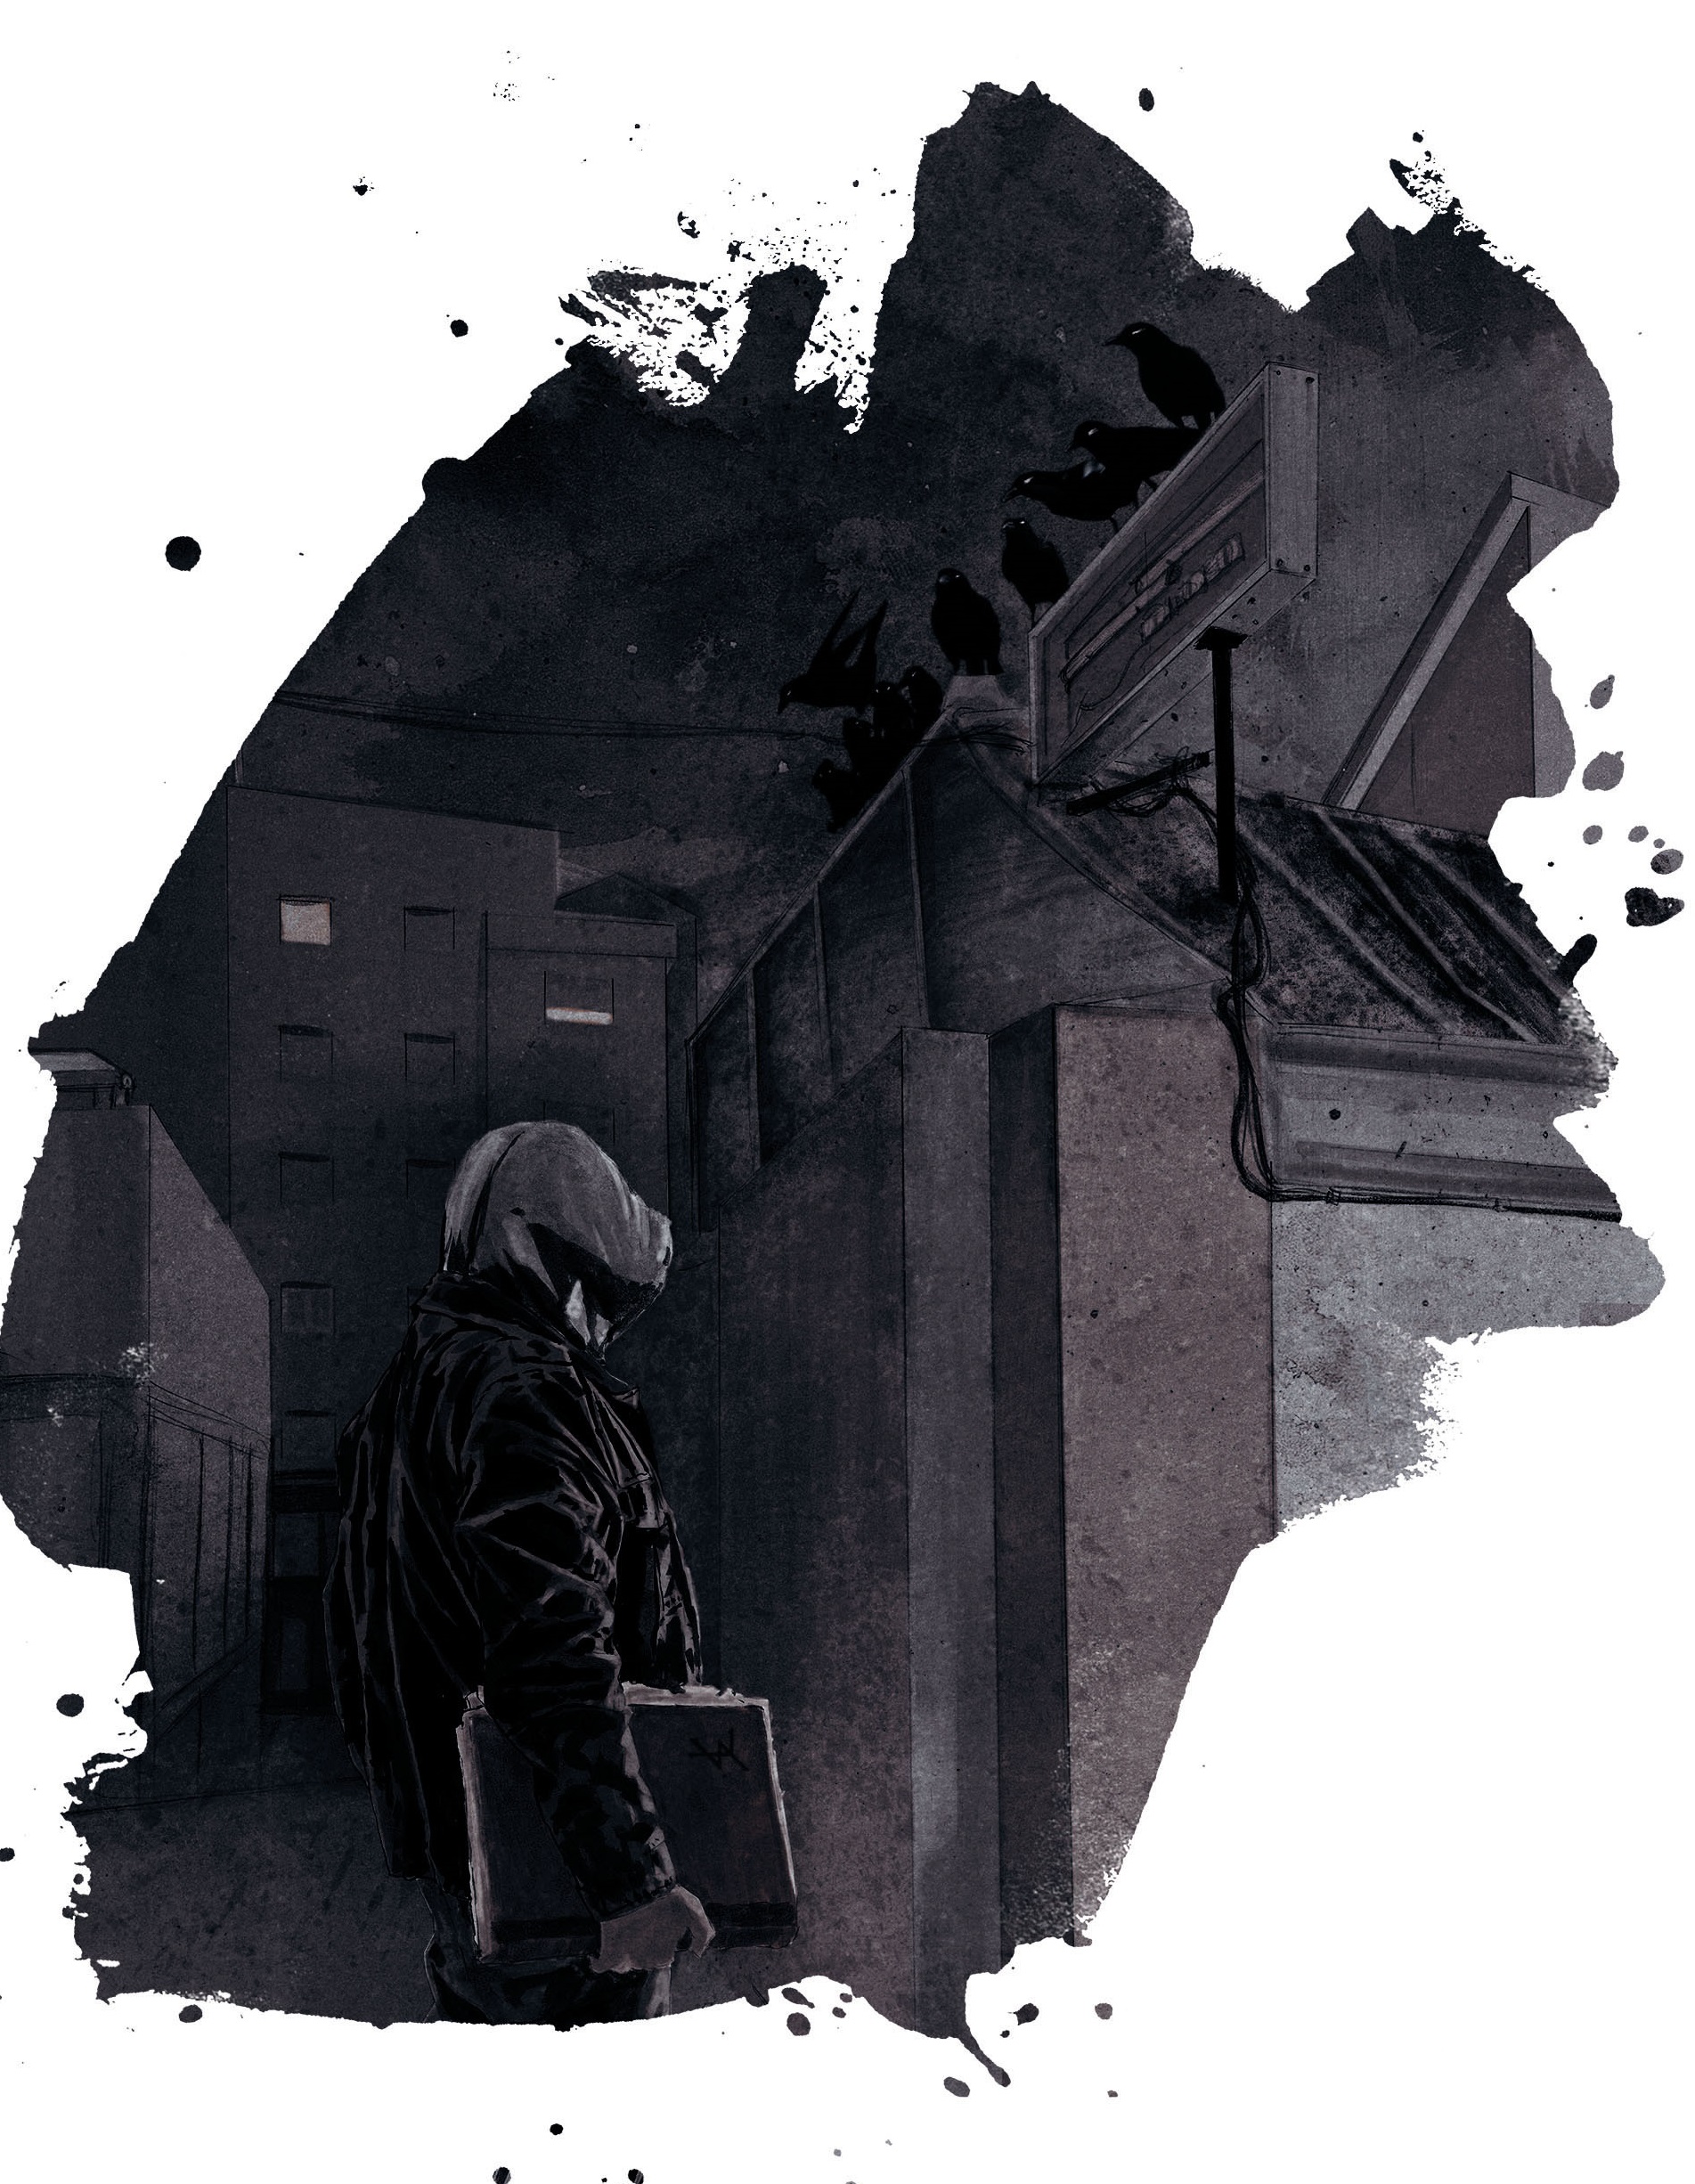 An illustration of a figure in a hoodie staring down a dark alley while ravens watch from overhead